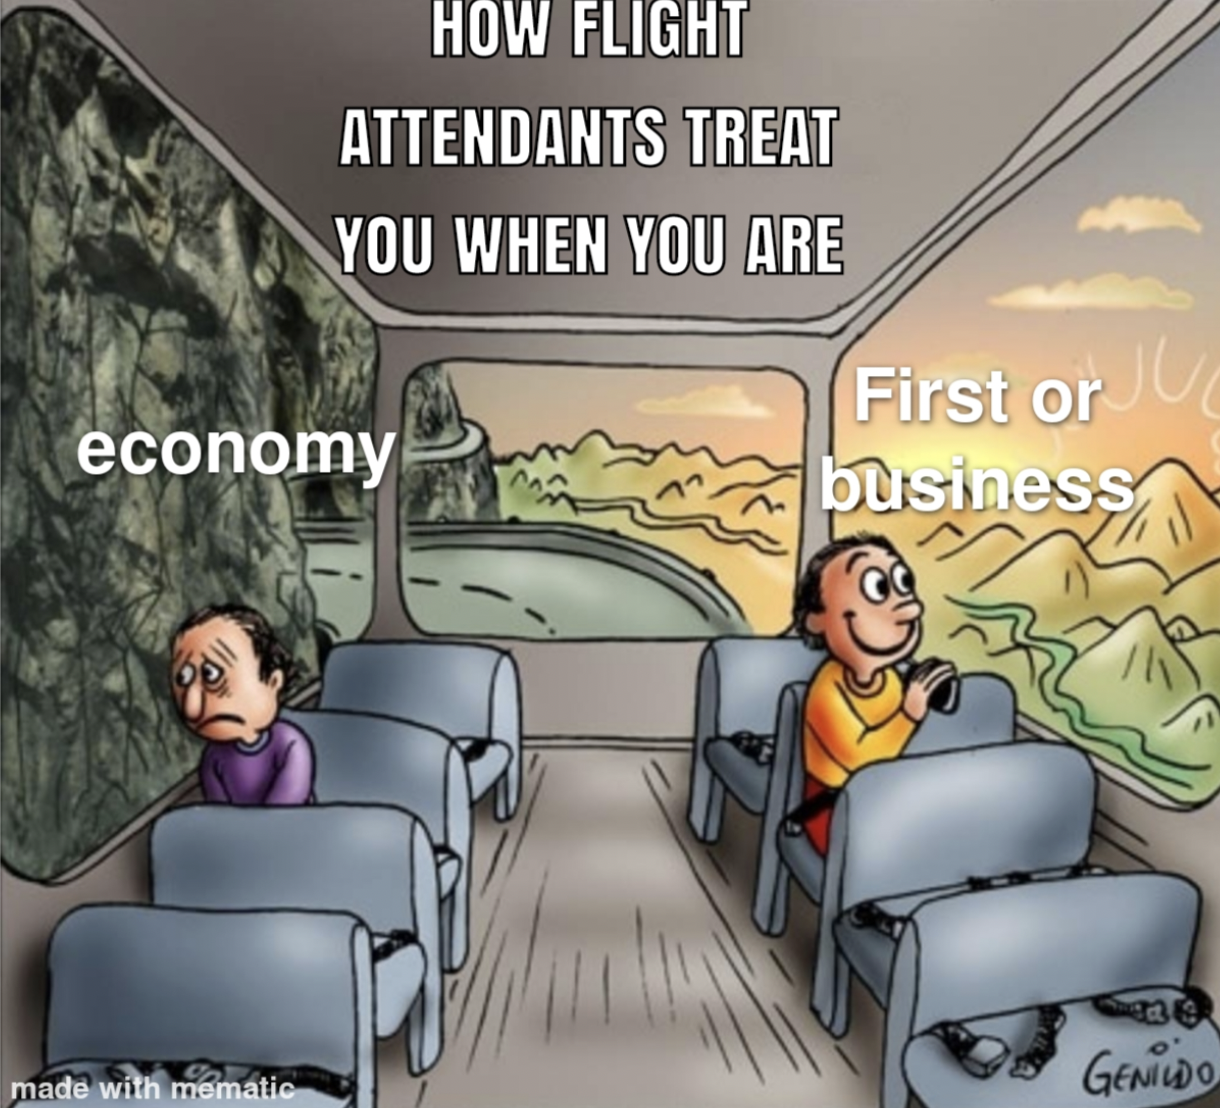 cartoon - How Flight Attendants Treat You When You Are economy made with mematic First or business C Genildo